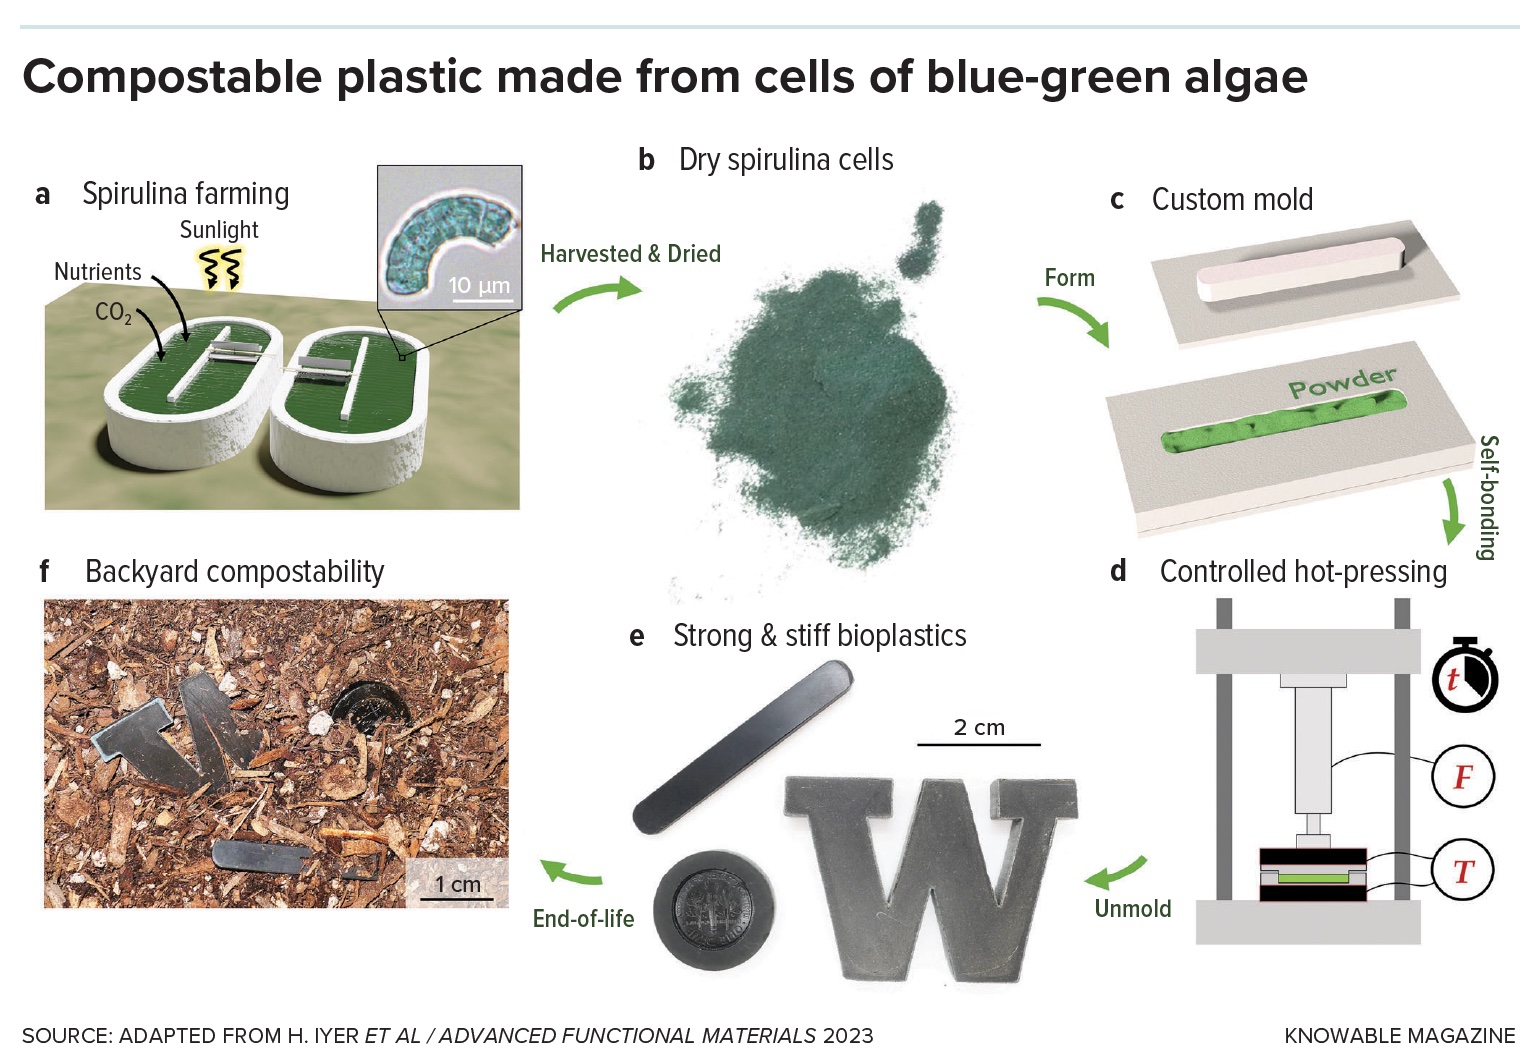 A diagram illustrating the production of compostable plastic from spirulina algae, including steps like harvesting, drying, molding, hot-pressing, and methods for composting the bioplastic.